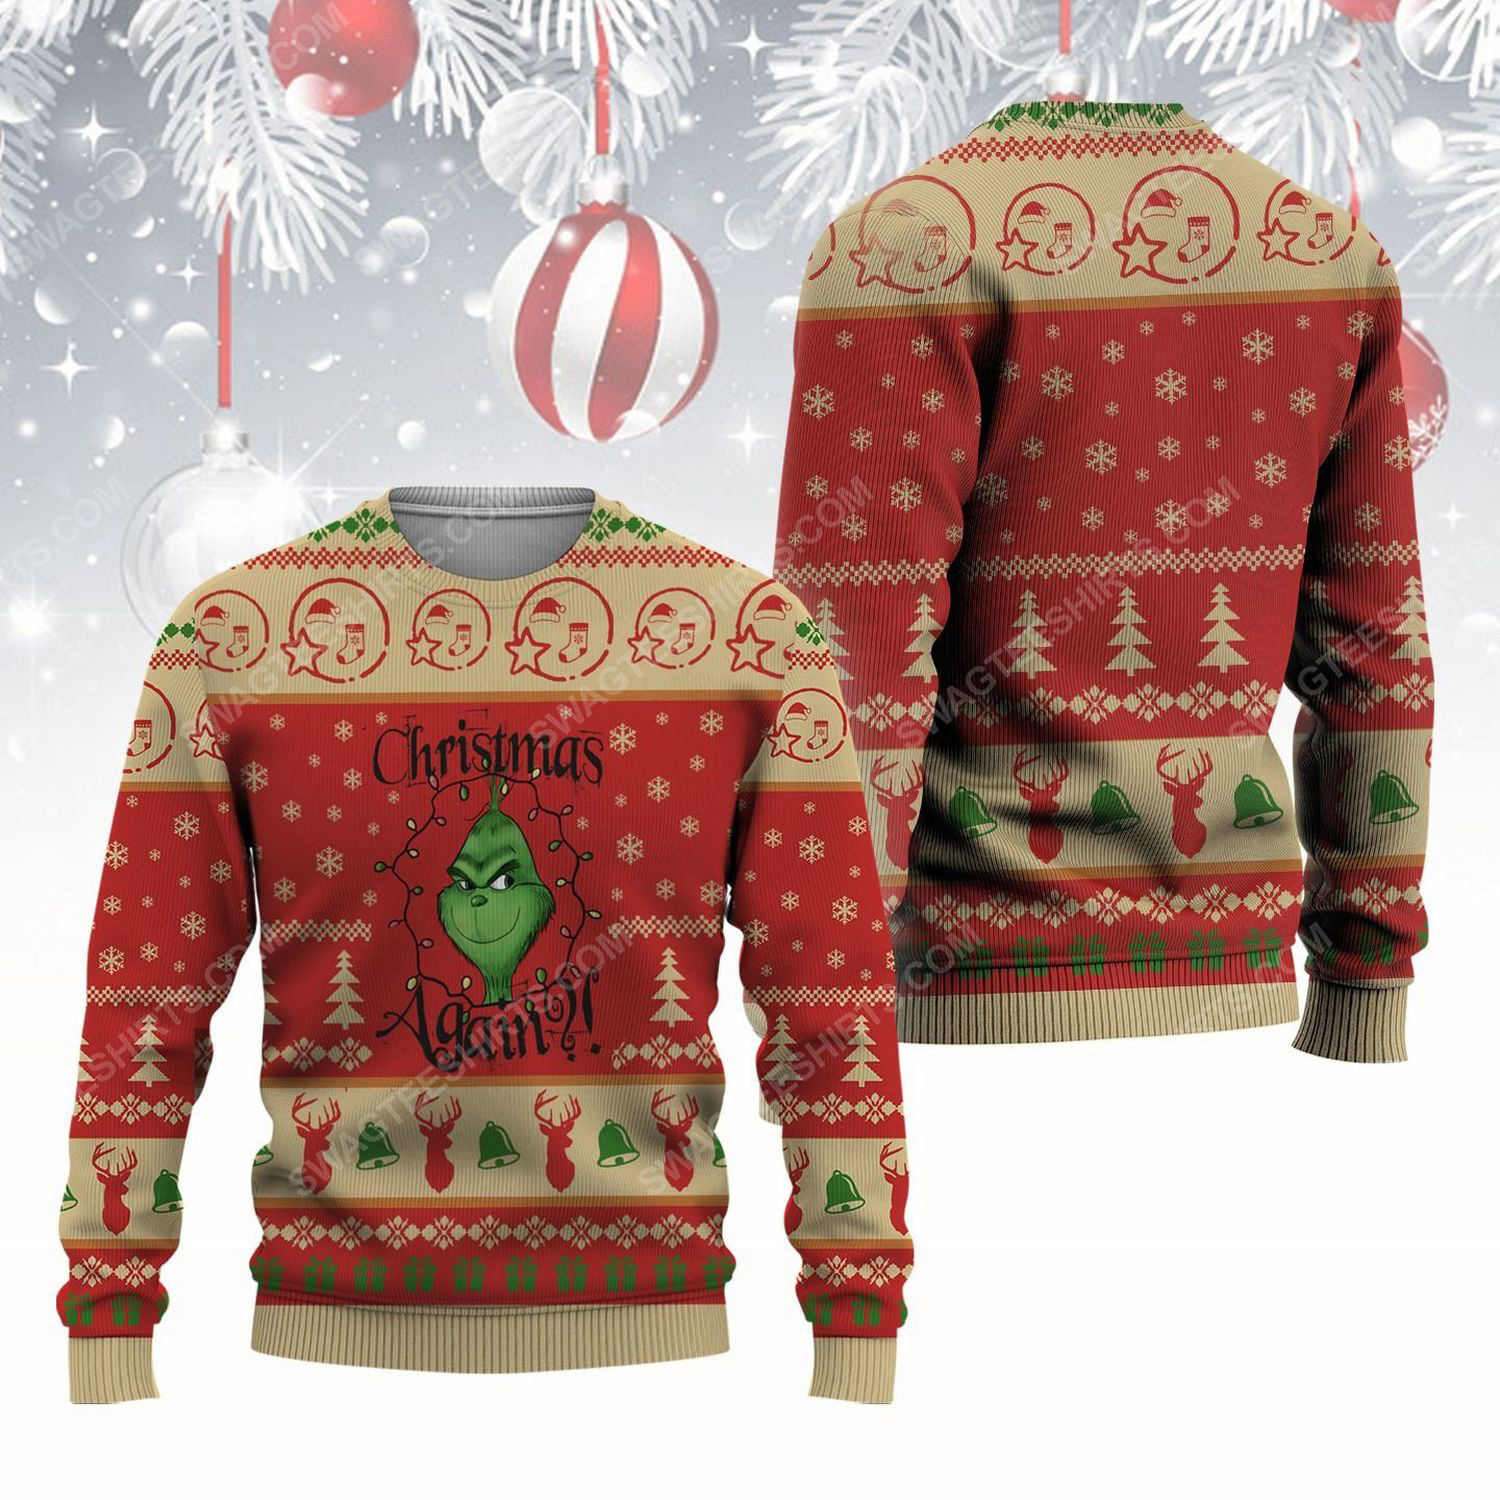 Christmas again the grinch ​ugly christmas sweater